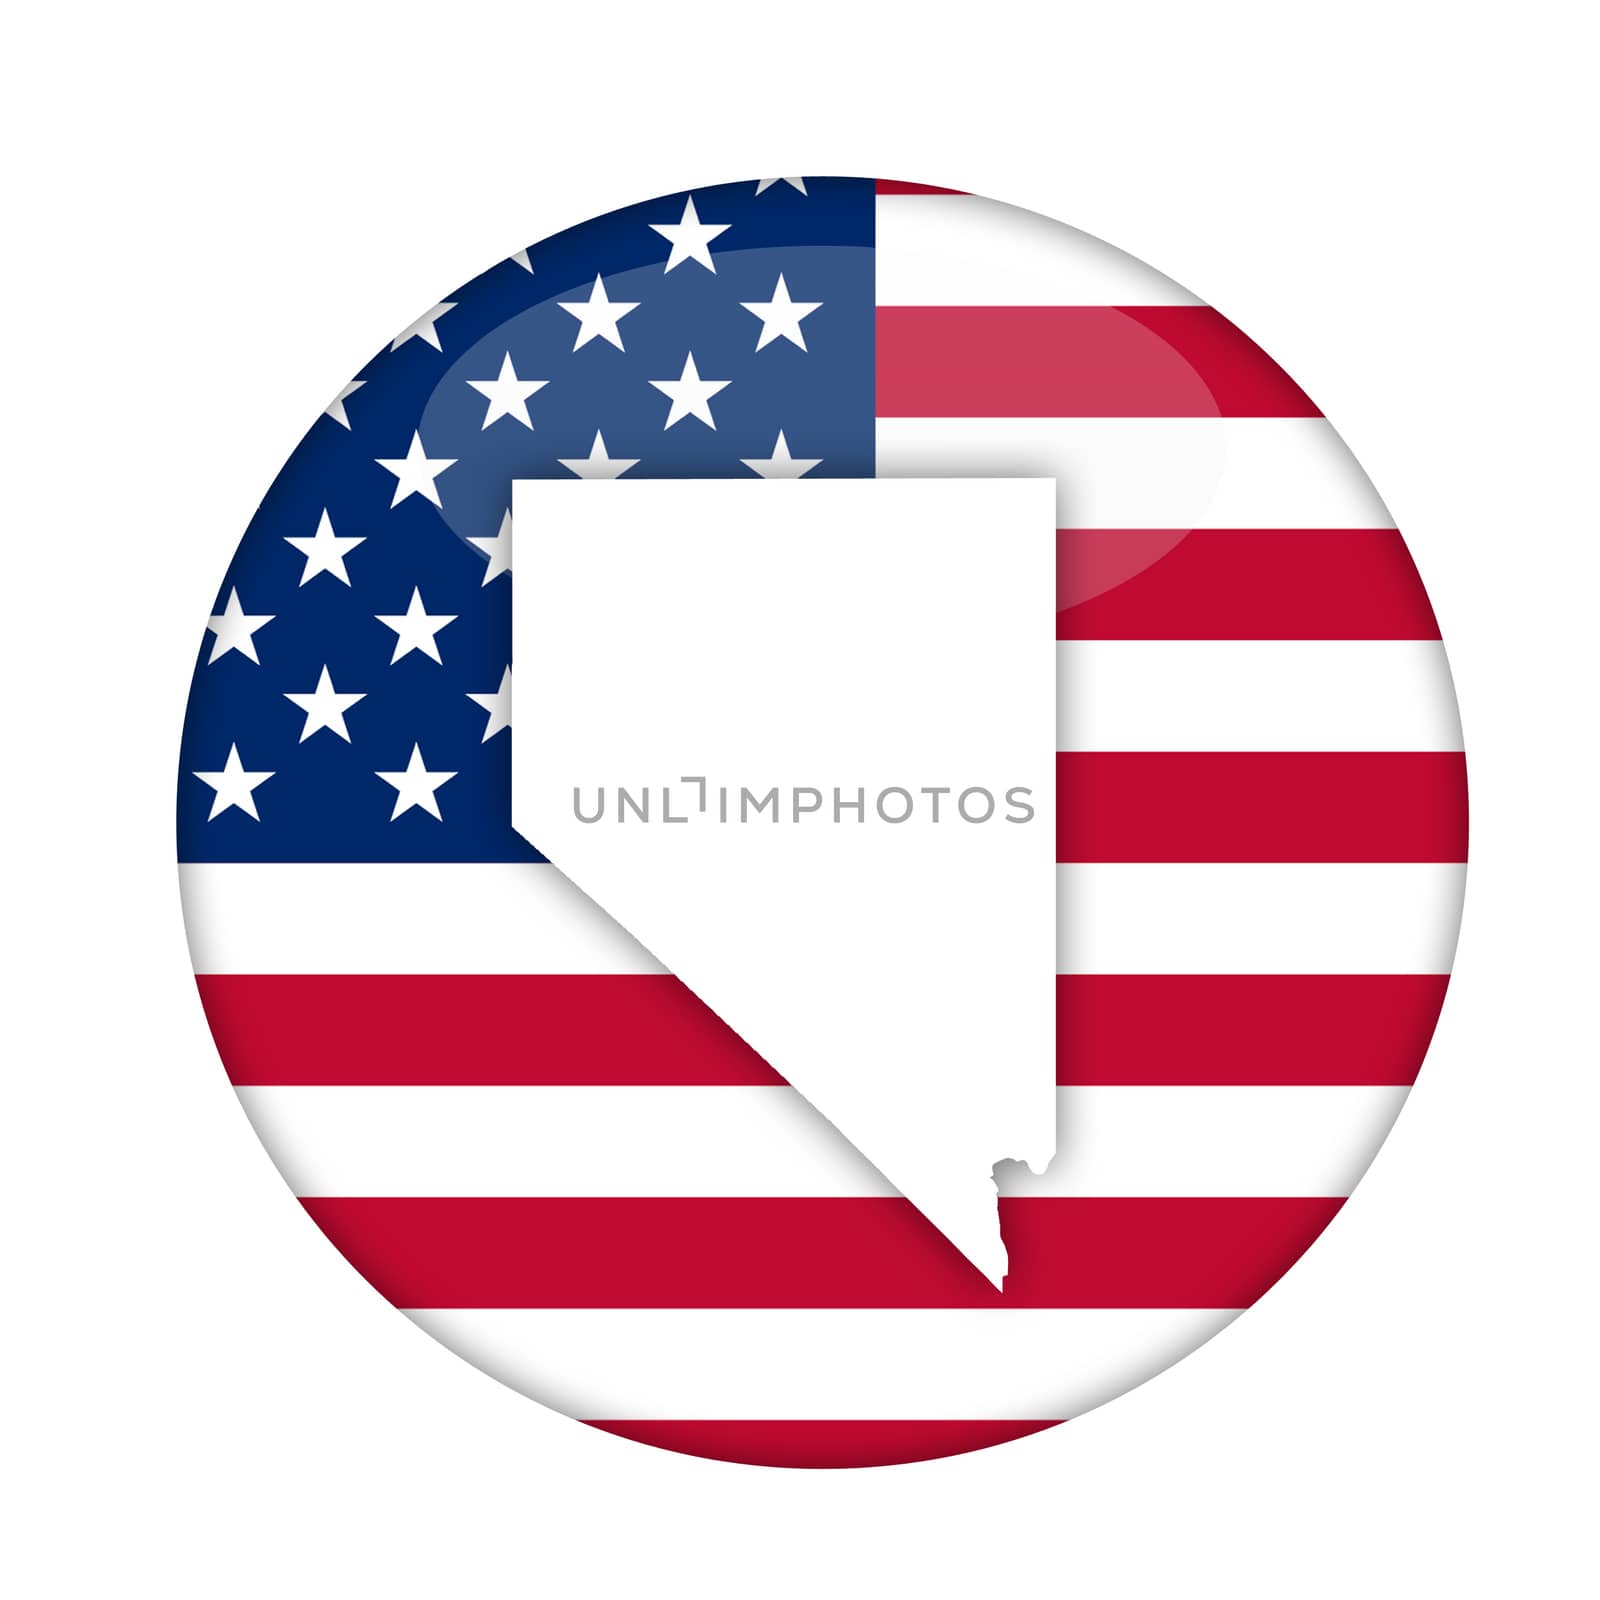 Nevada state of America badge by speedfighter